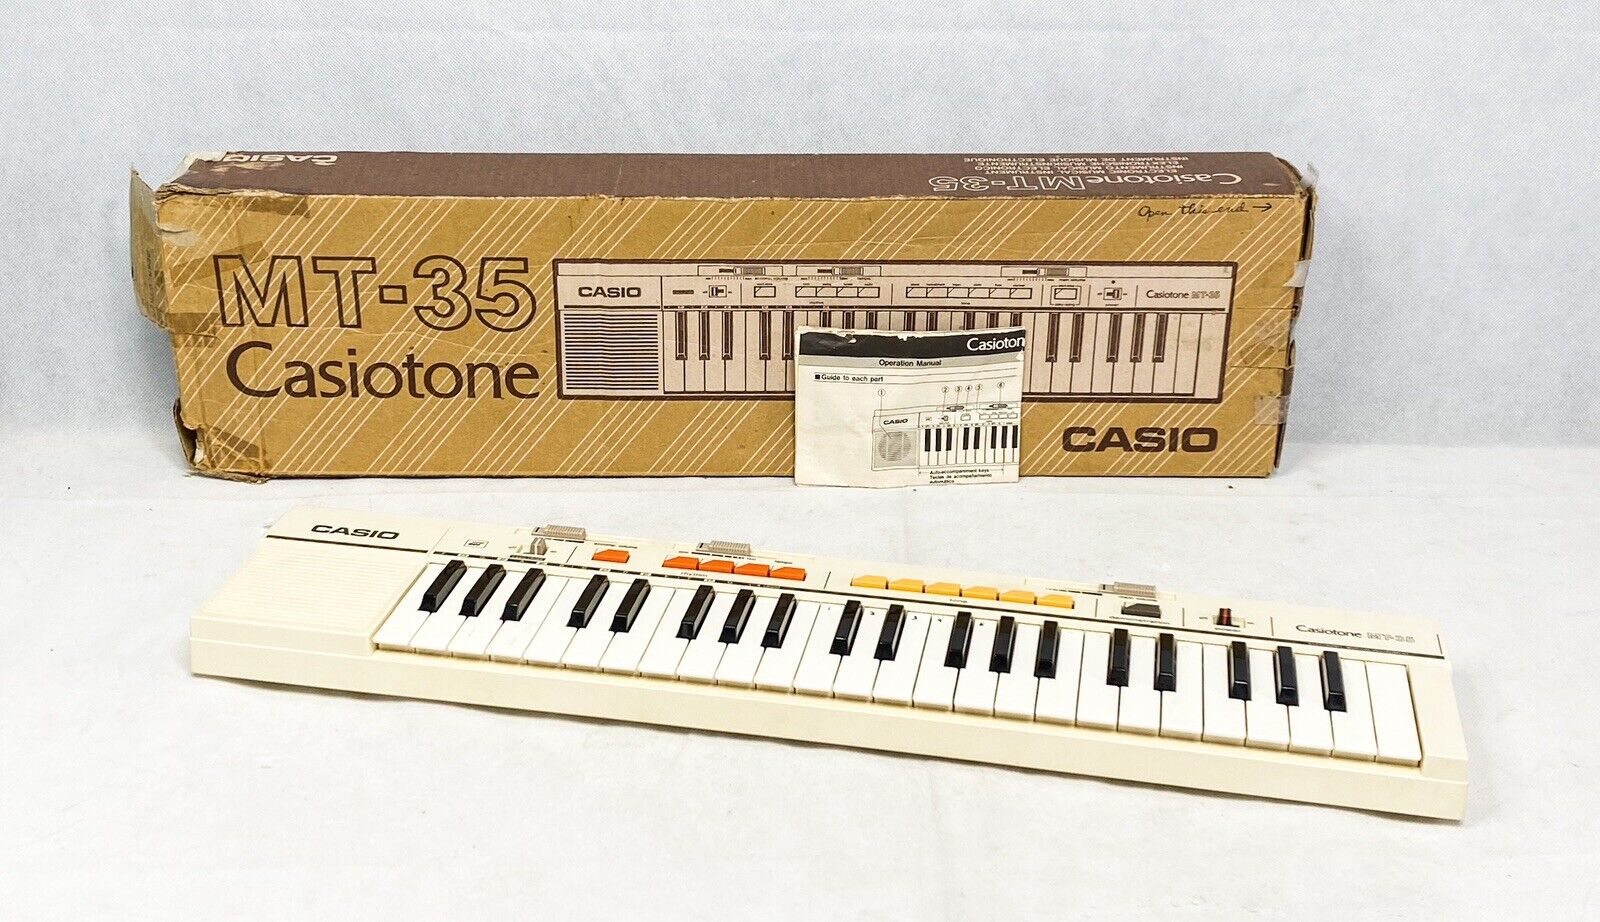 CASIO MT-35 CASIOTONE ELECTRONIC KEYBOARD SYNTHESIZER W/ BOX, OWNER'S MANUAL